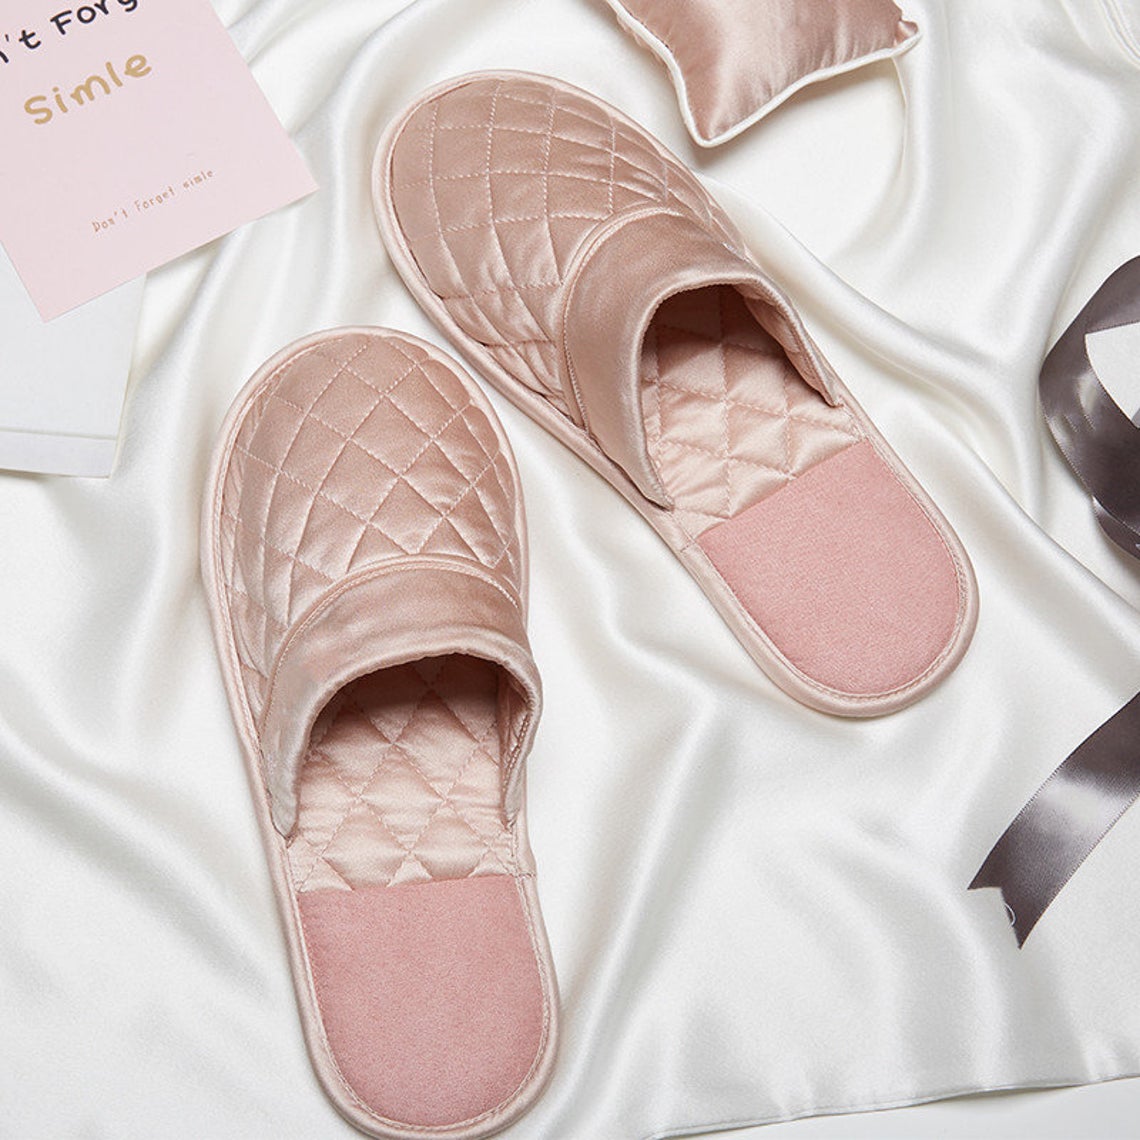 Silk Slippers Dreamwithus Pink